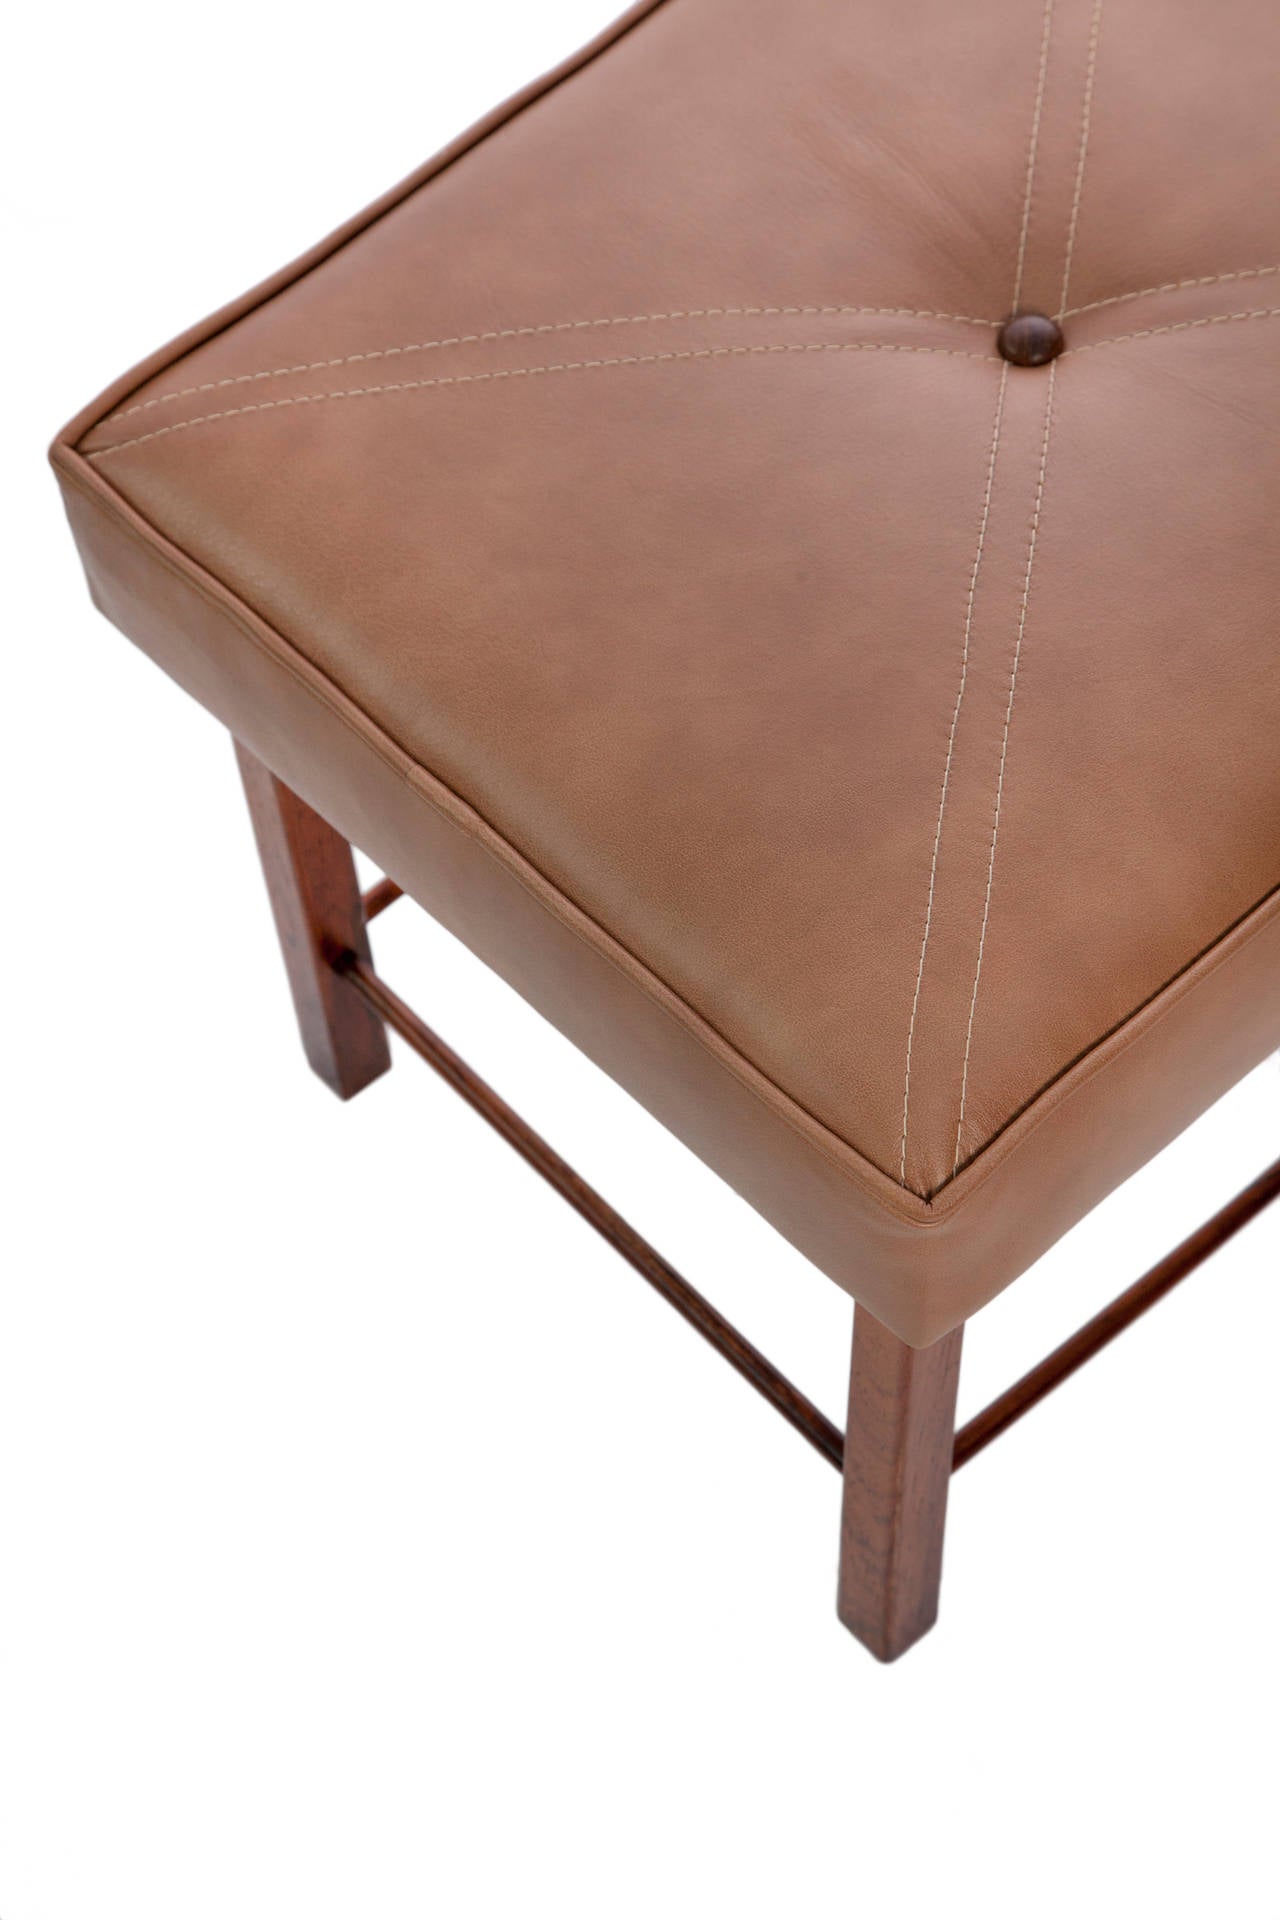 Brazilian A Midcentury Stool in Jacaranda Wood with Tufted Beige Leather Seat